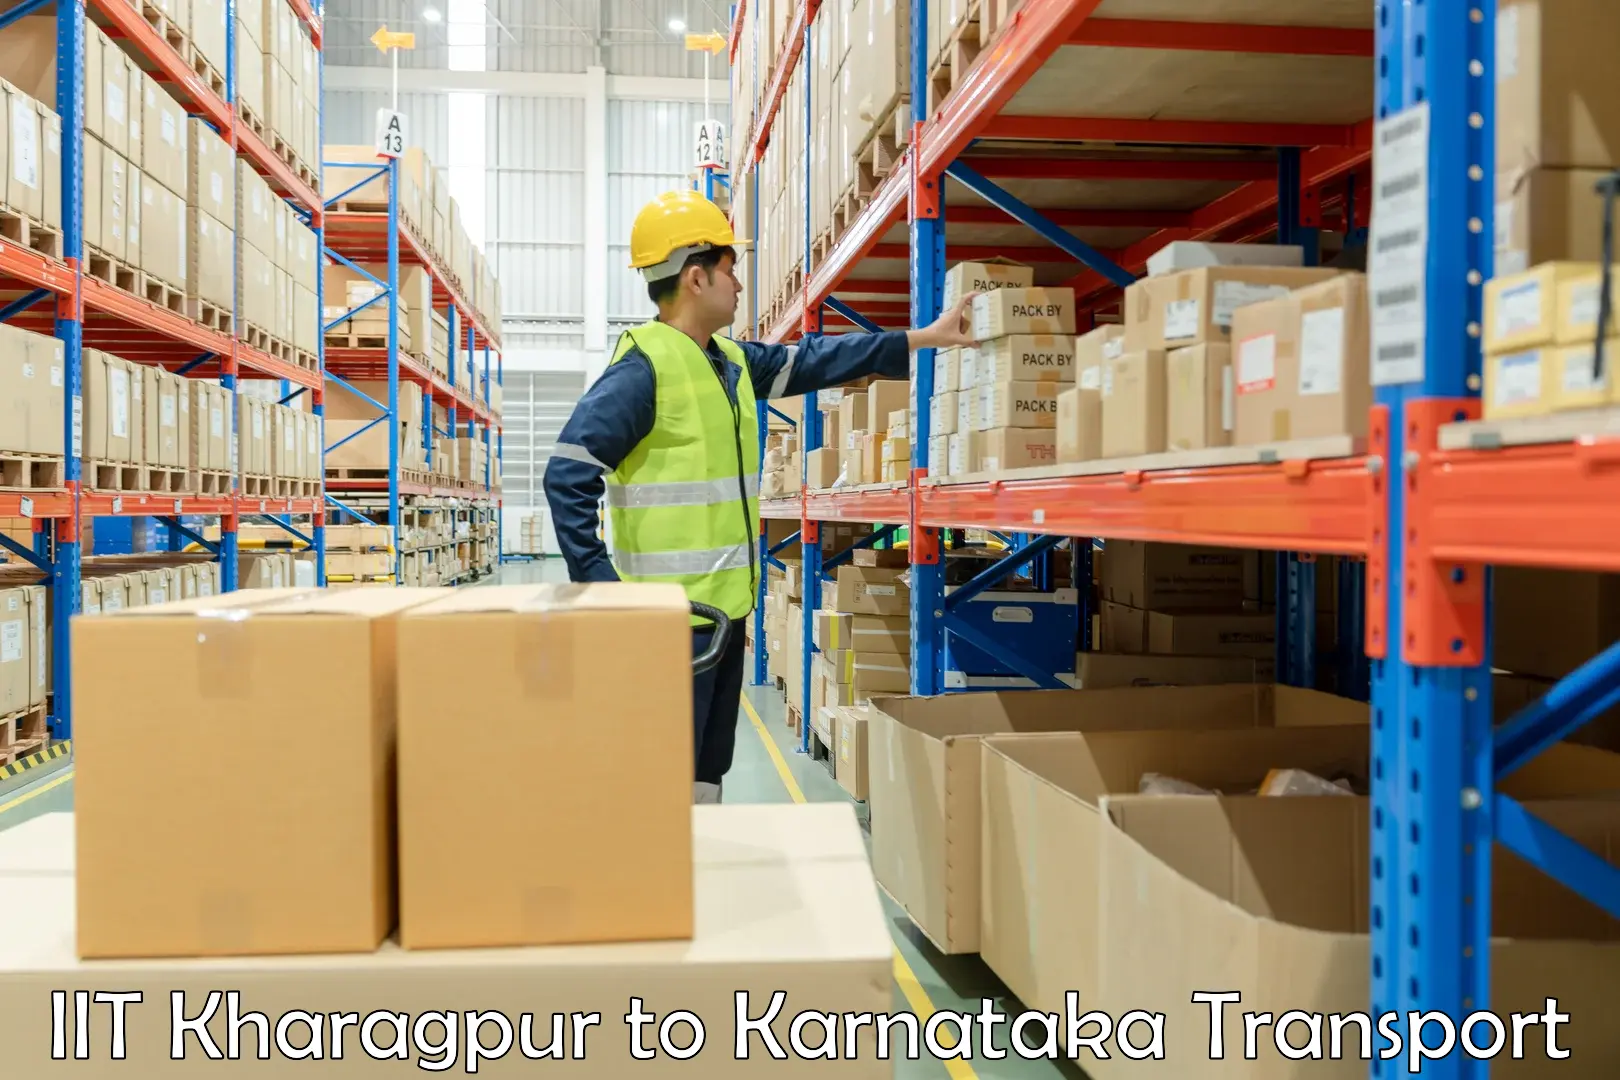 Daily parcel service transport in IIT Kharagpur to Ballari